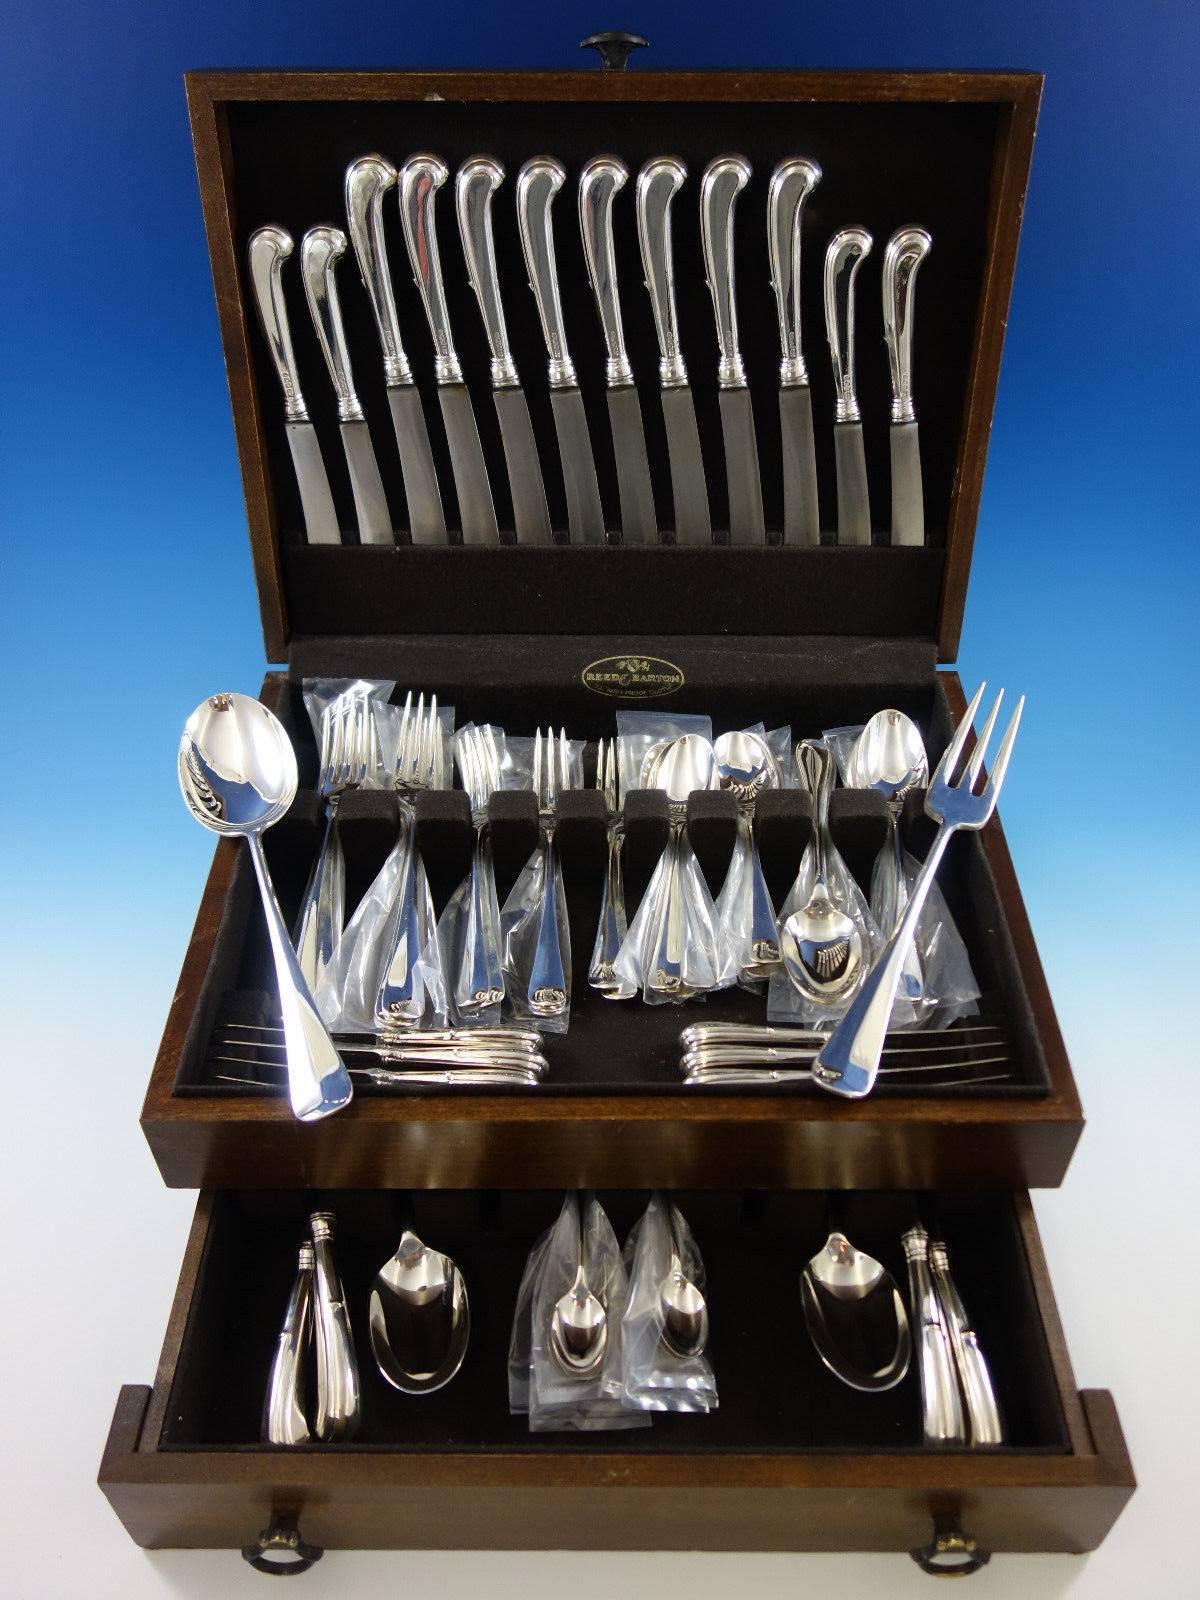 Queen Ann by Worcester (England) sterling silver dinner size flatware set of 68 pieces. This set includes: 

Eight dinner size knives, pistol grip, 9 3/4